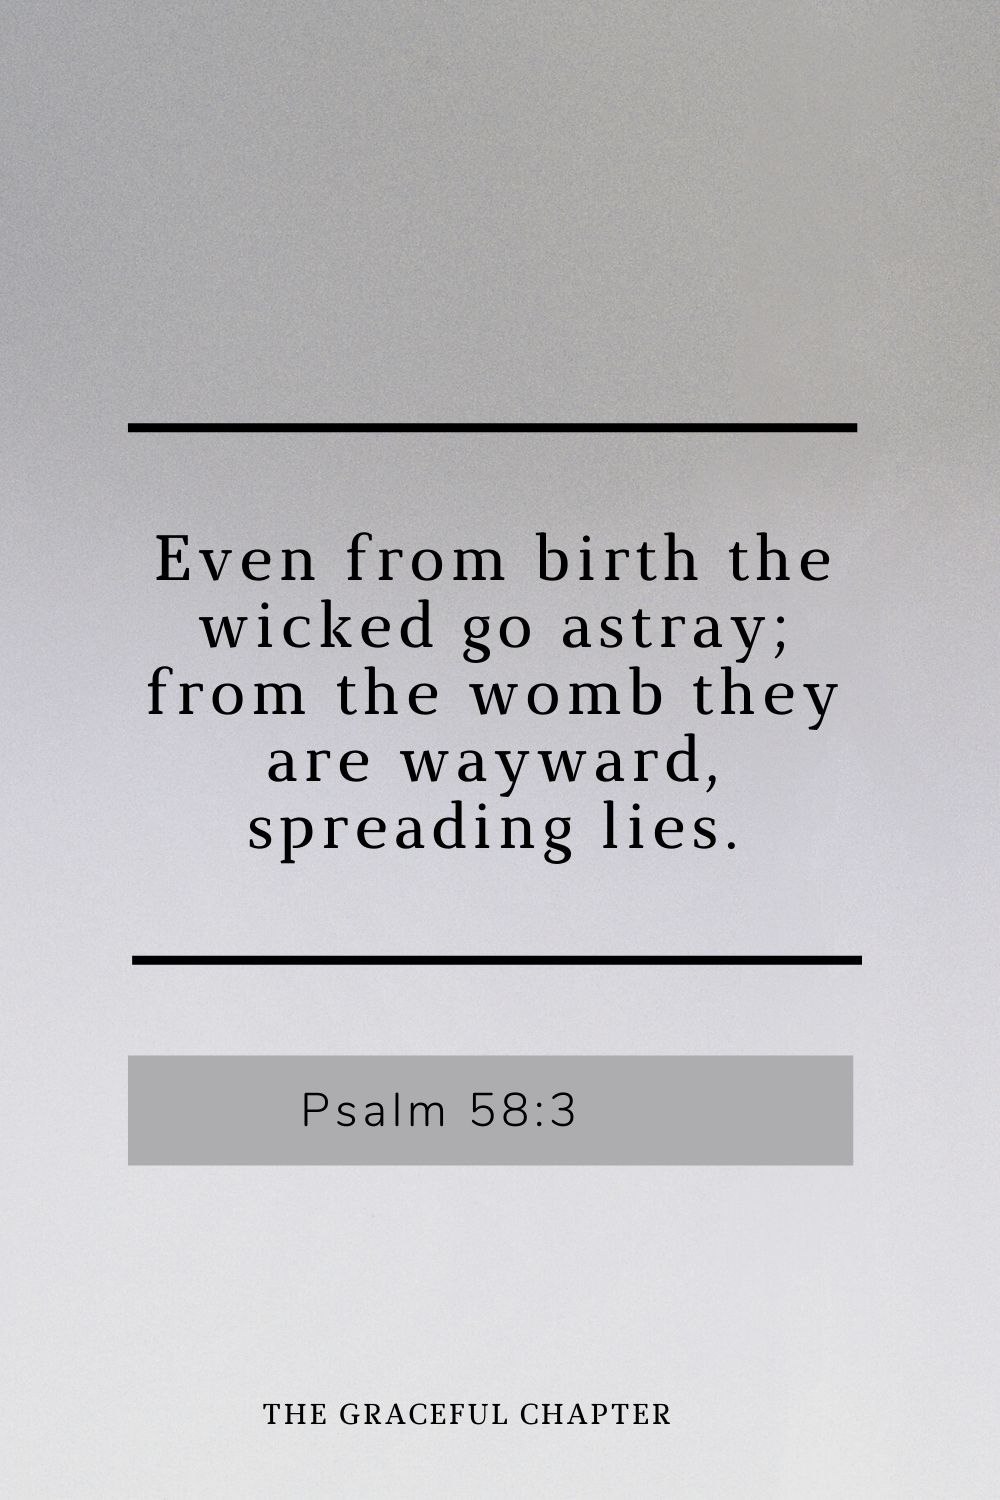 Even from birth the wicked go astray; from the womb they are wayward, spreading lies. Psalm 58:3